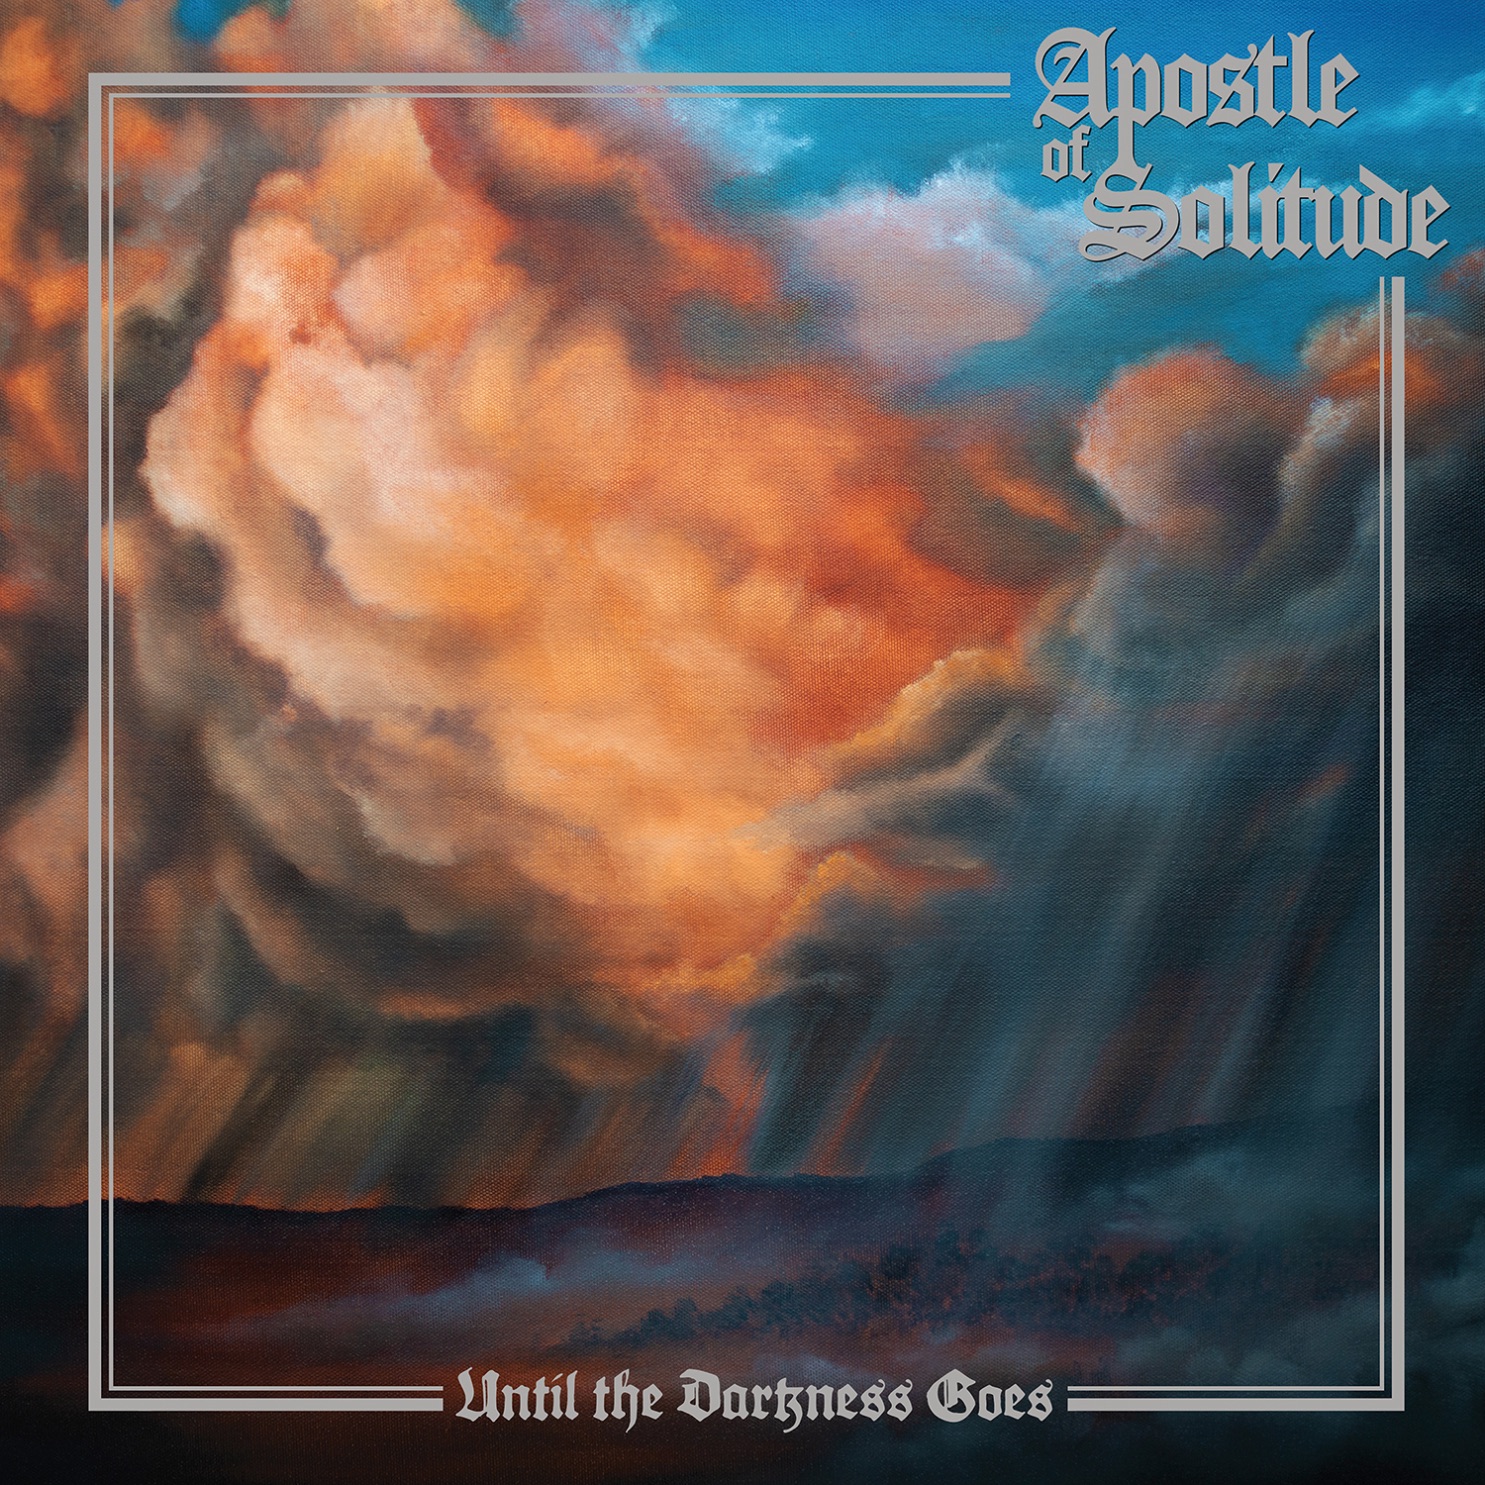 Apostle of Solitude – When the Darkness Goes Review